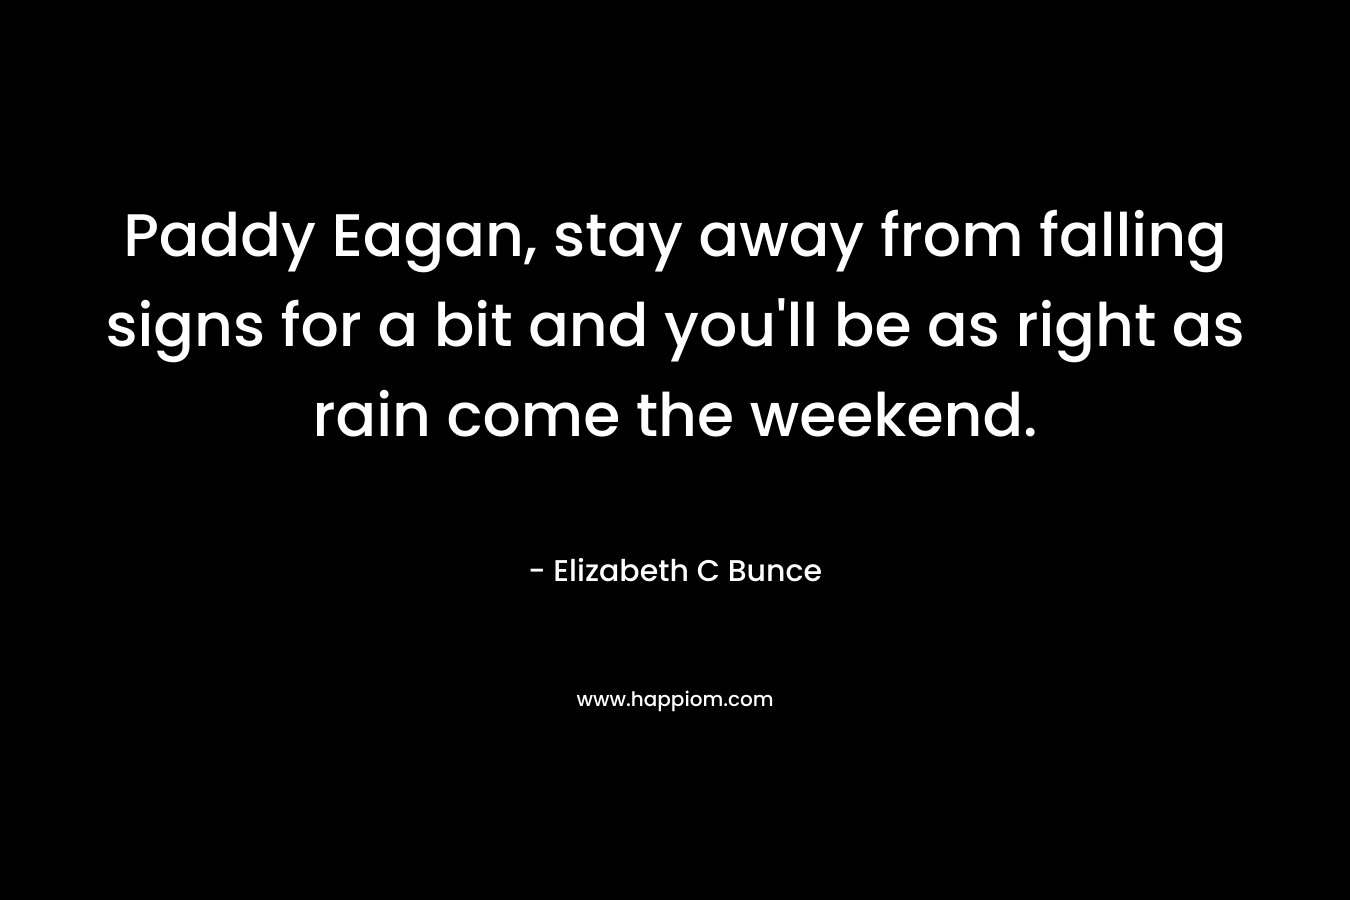 Paddy Eagan, stay away from falling signs for a bit and you’ll be as right as rain come the weekend. – Elizabeth C Bunce